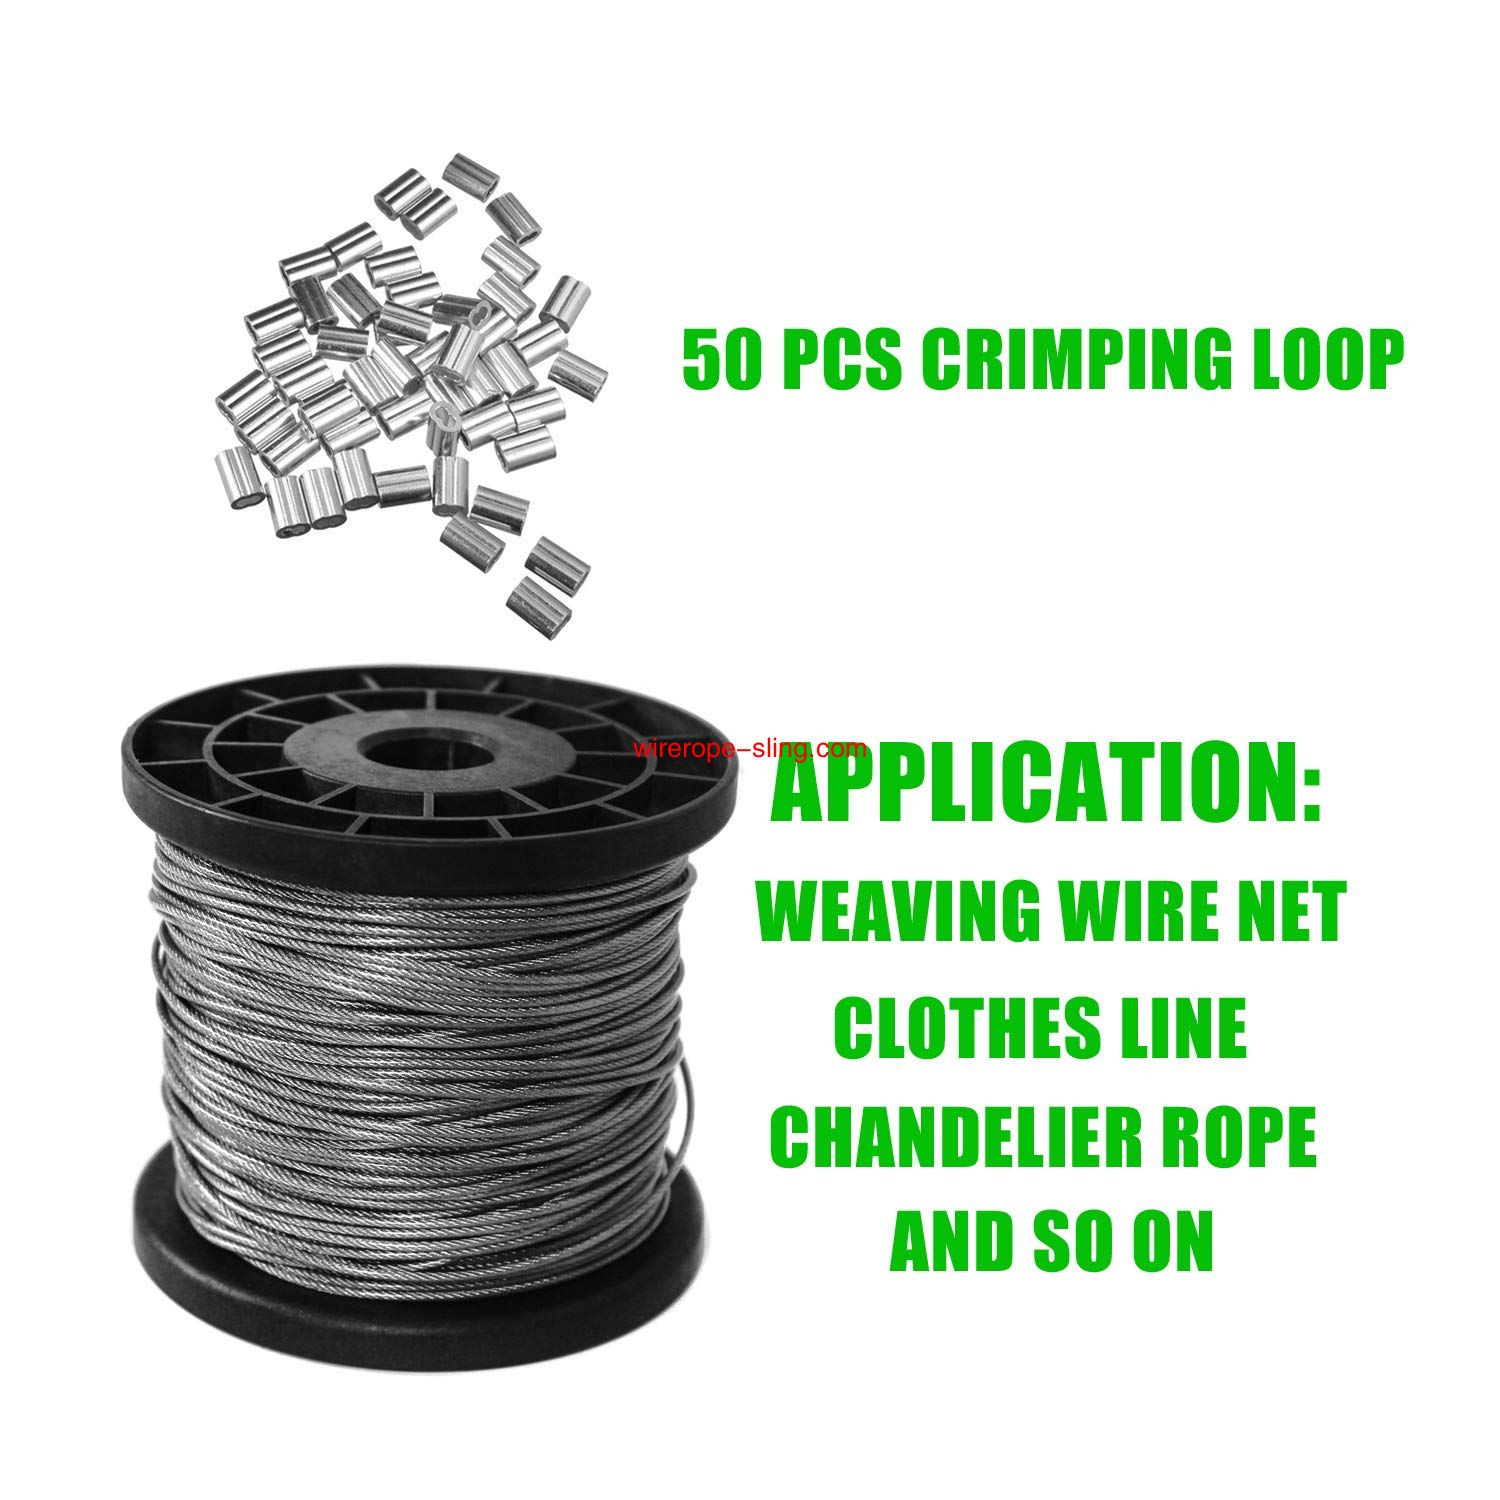 1/16 Ink Vinyl Coated Wire Rope Kit,330 Feet Stainless Steel 304 Wire Rope mit 50 PCS Aluminium Crimp Loop und 10 PCS Clamps